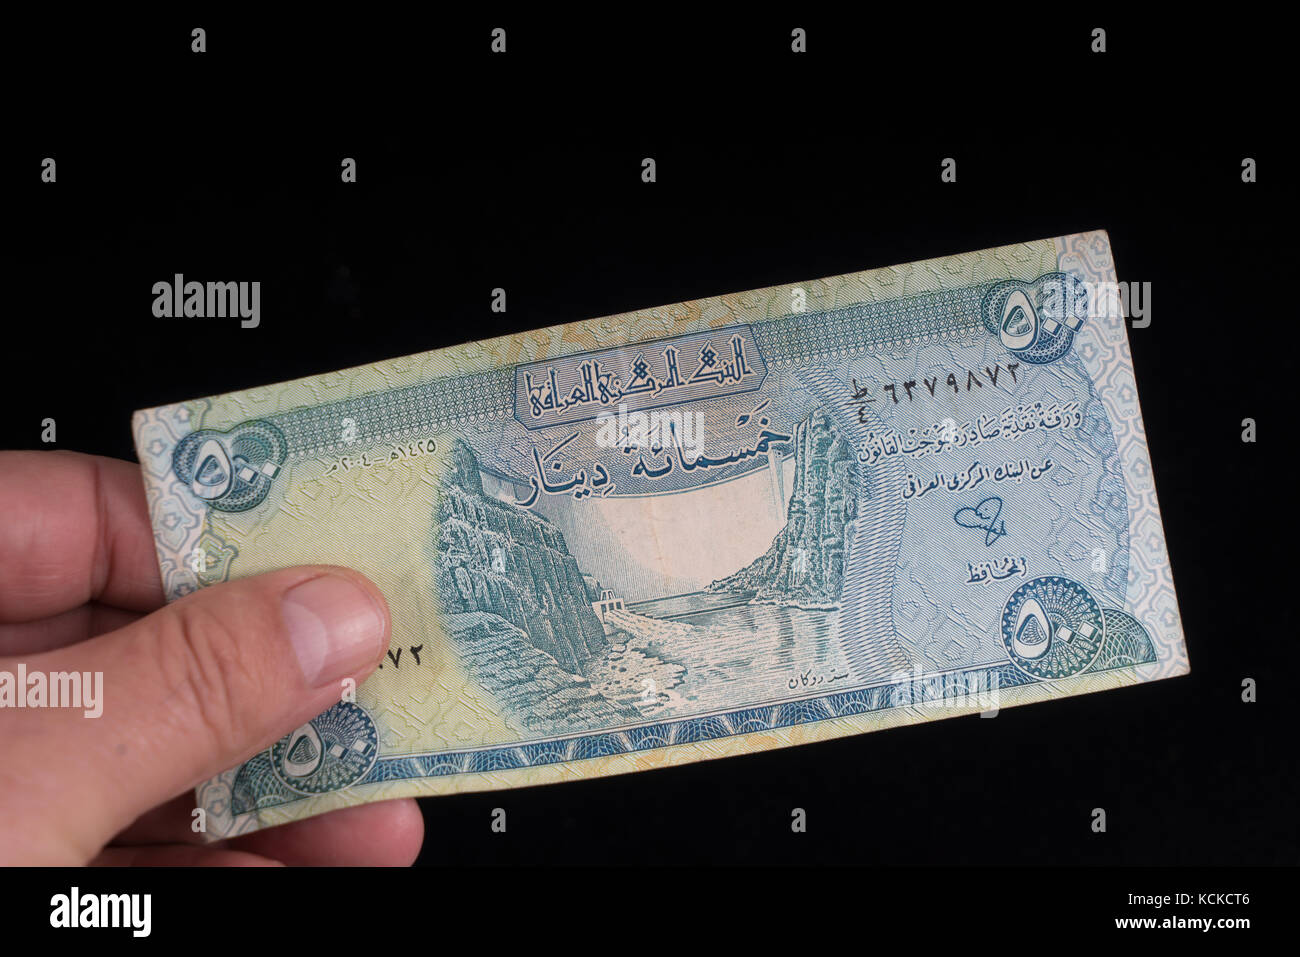 An old Iraqi banknote on hand Stock Photo